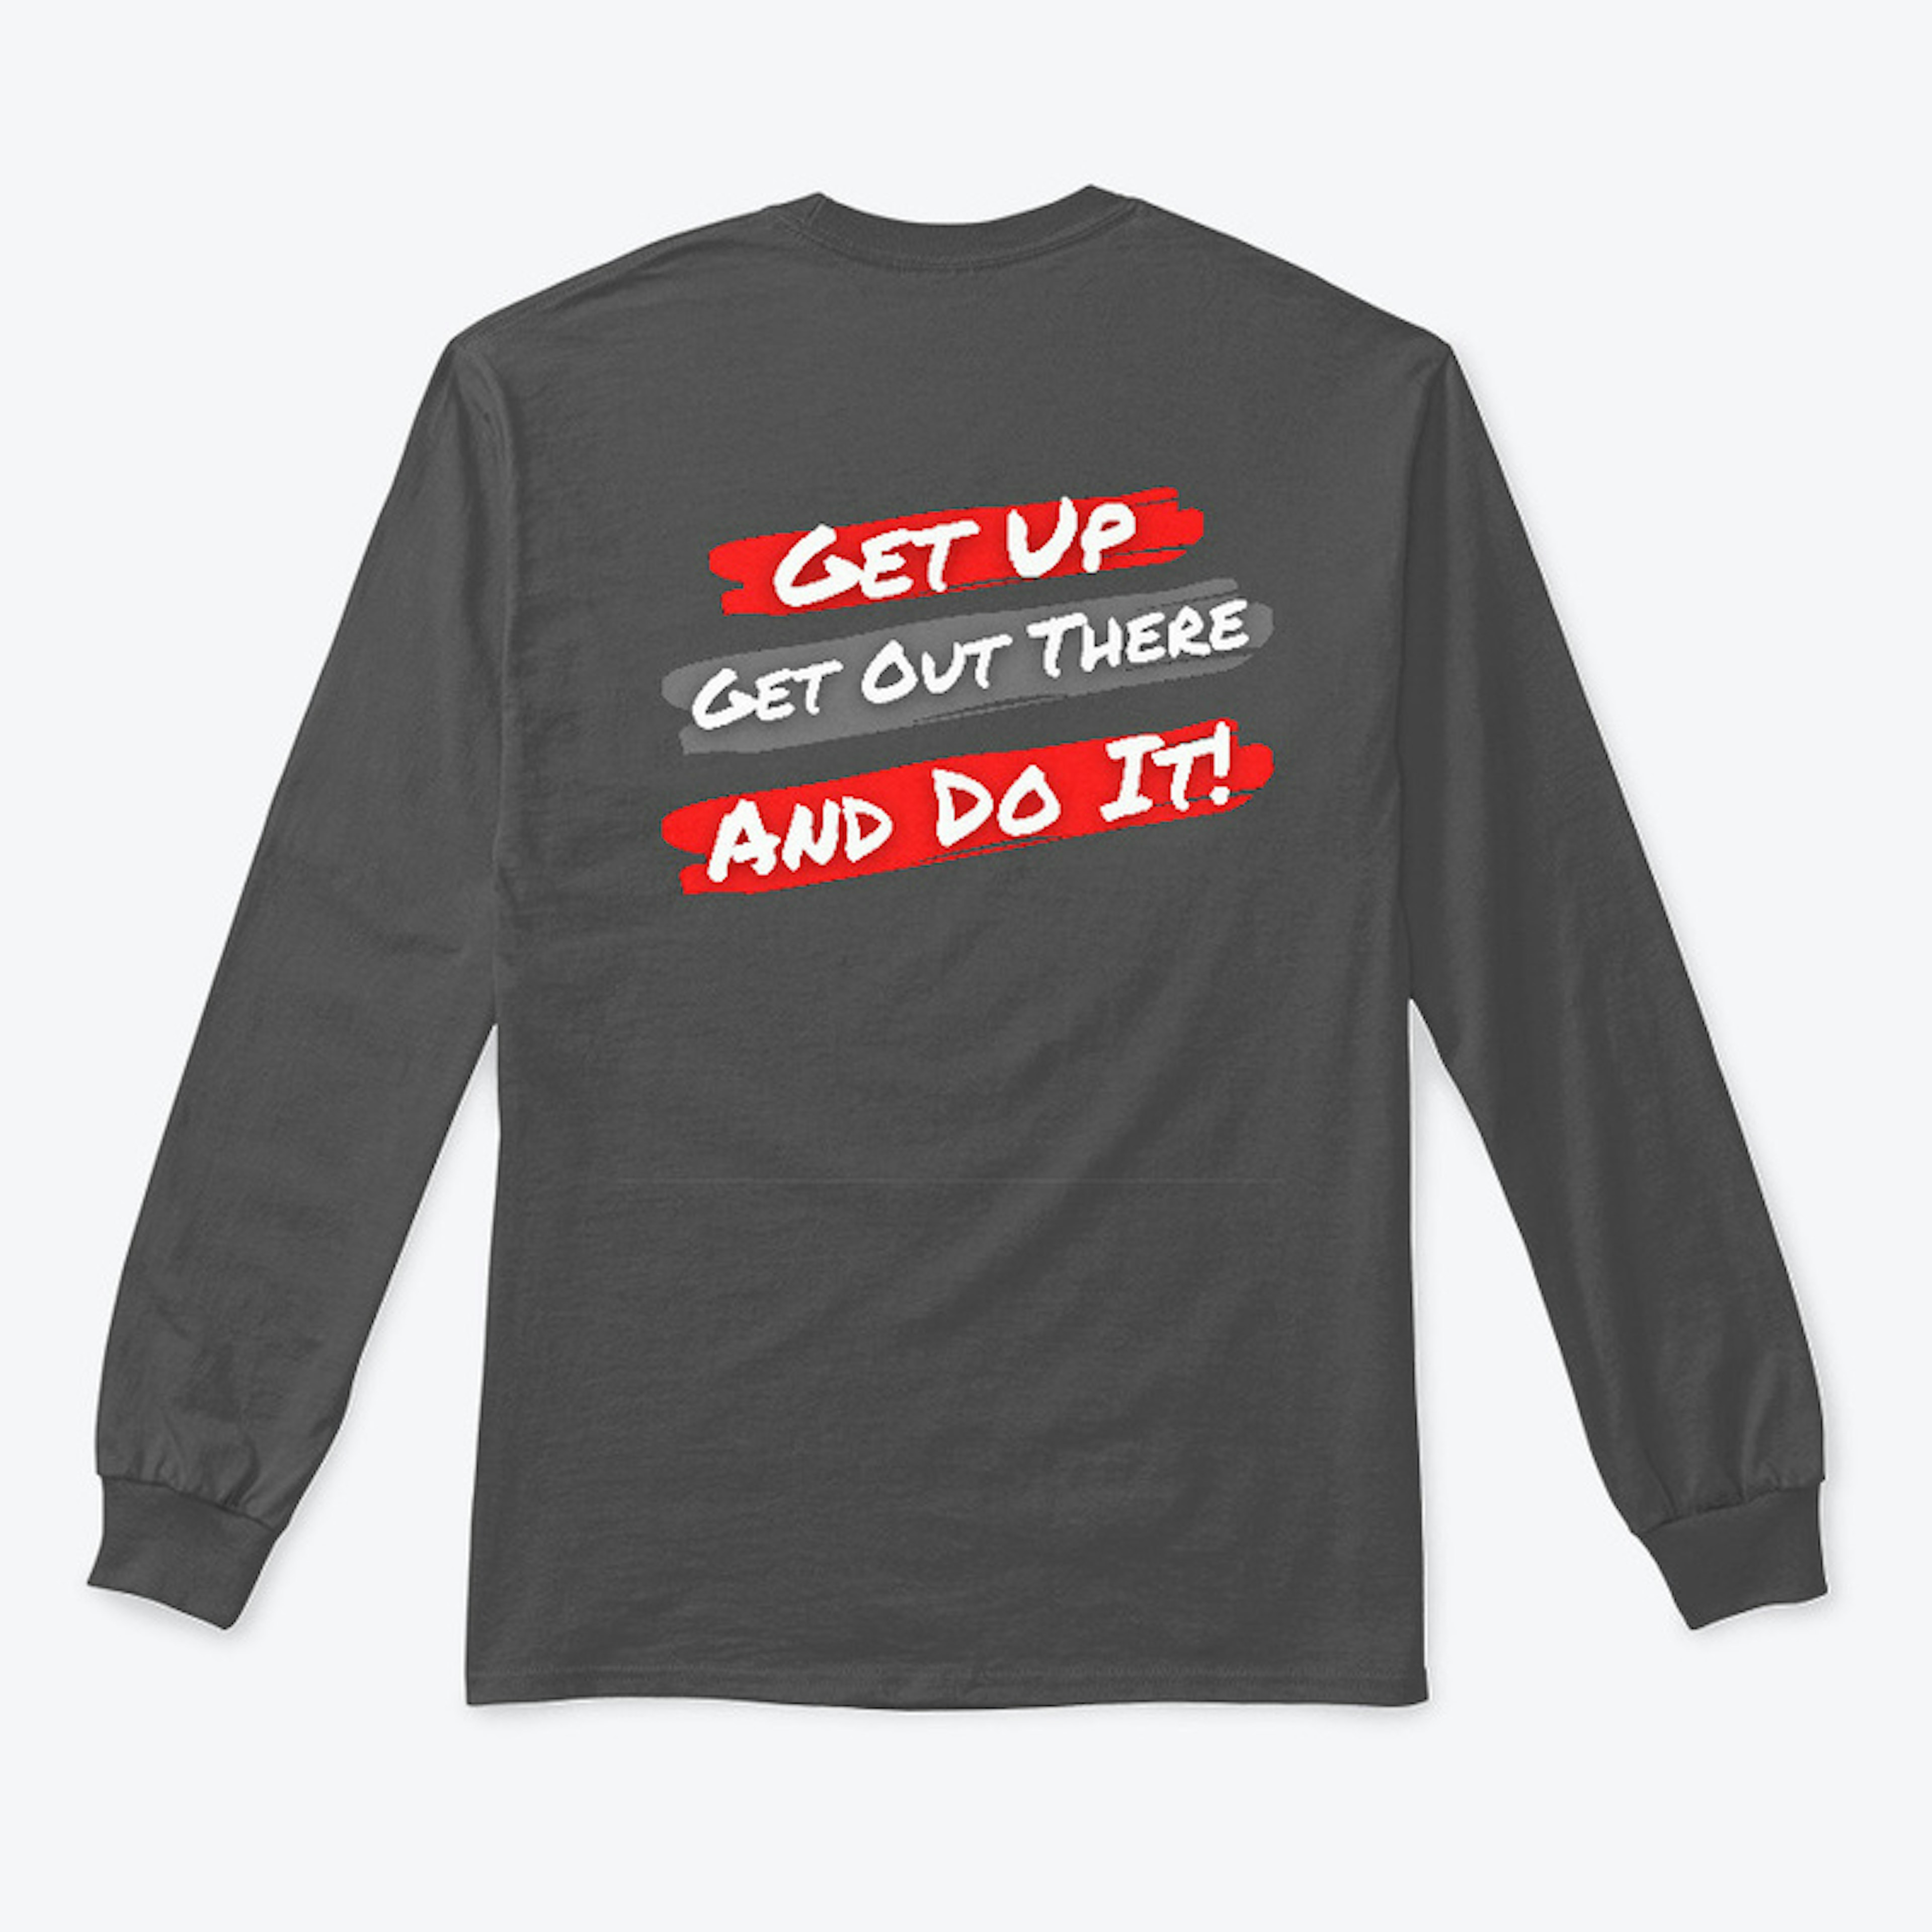 Our Slogan Long Sleeve T